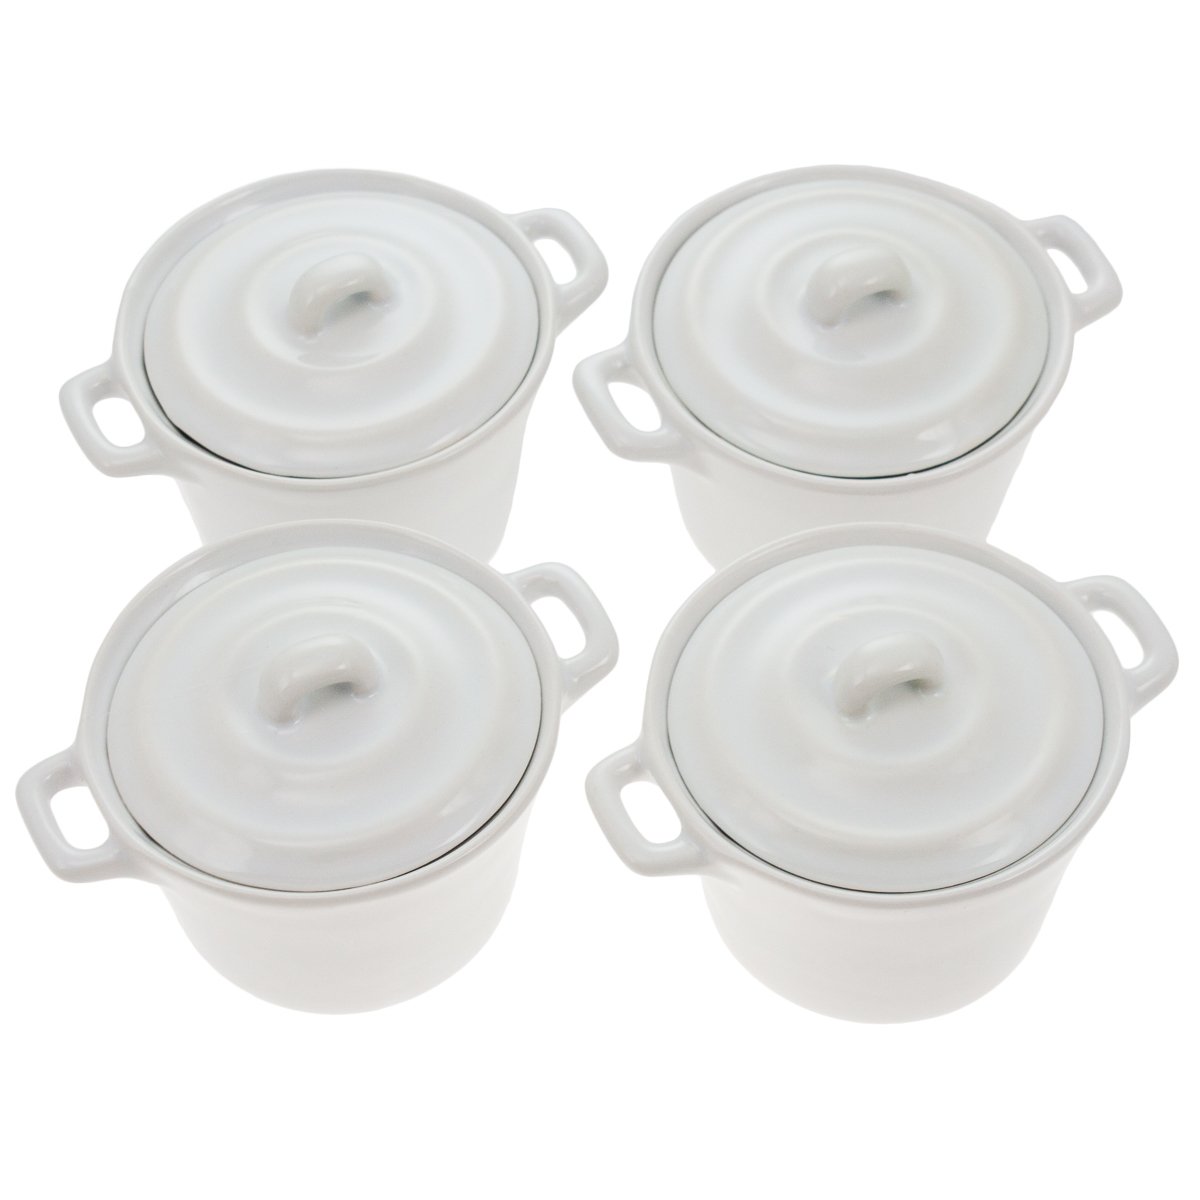 Price and buy porcelain dish with lid + cheap sale